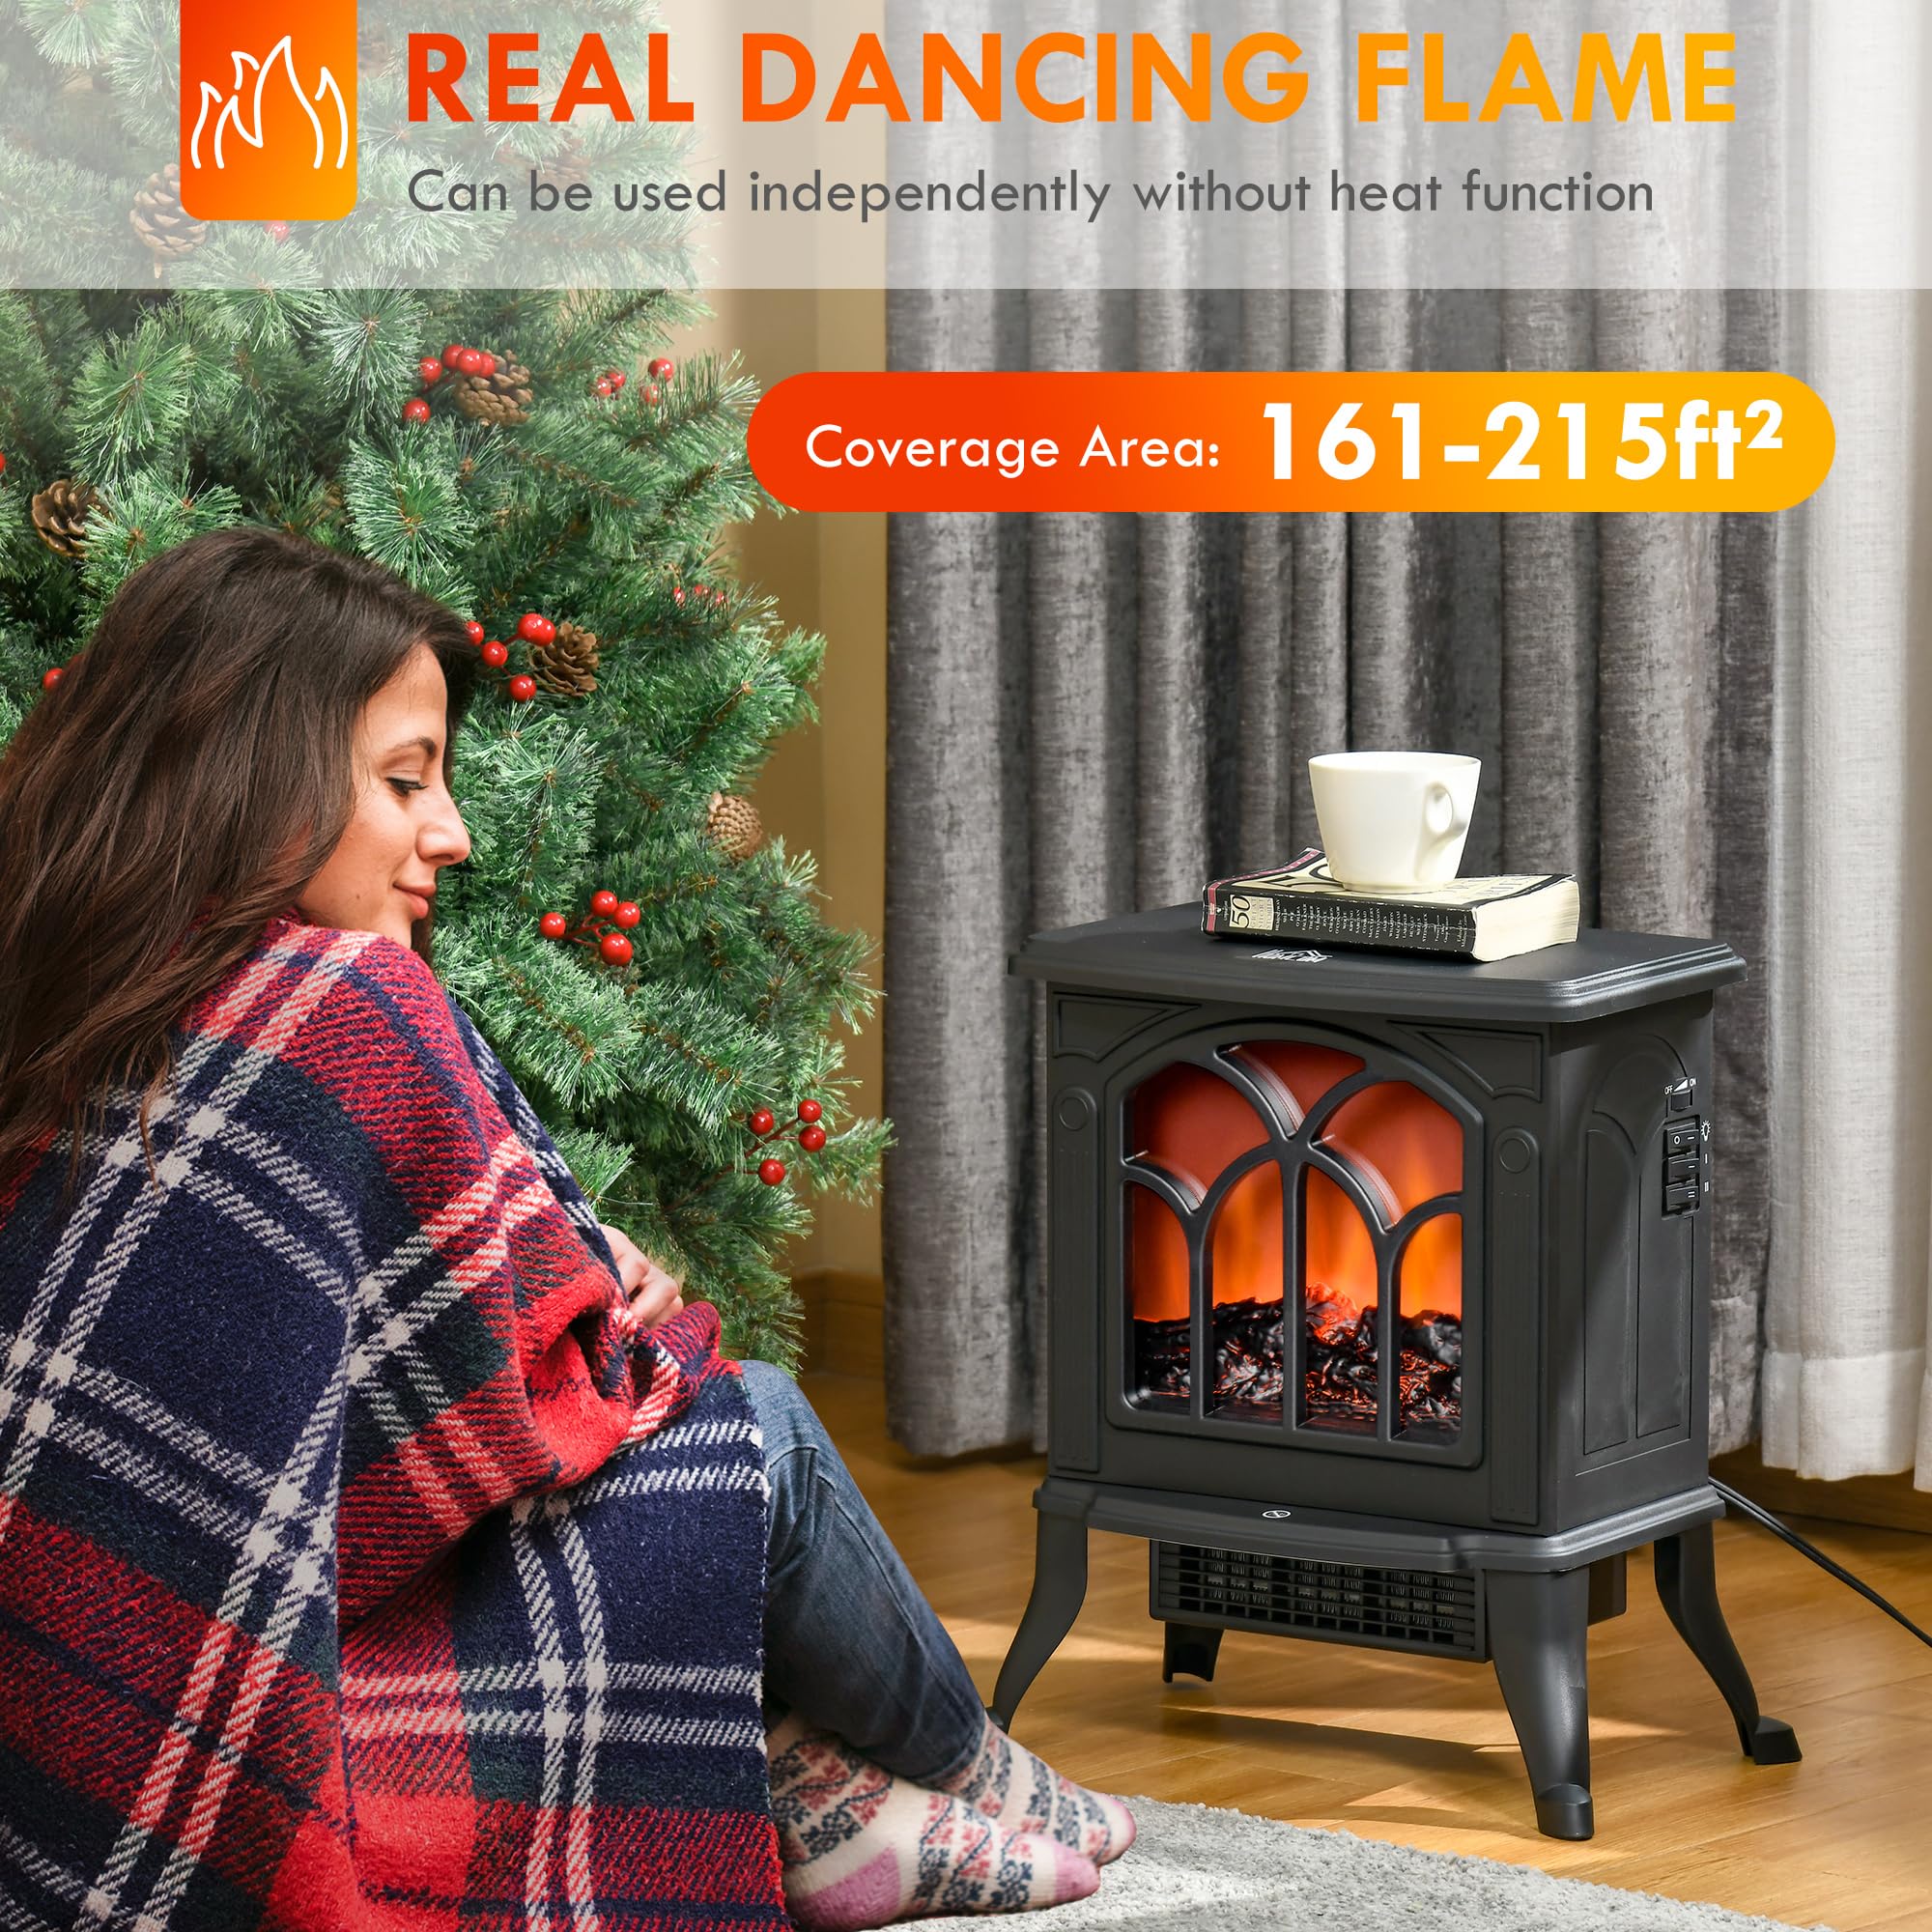 HOMCOM 17" Freestanding Electric Fireplace Stove, Fire Place Heater with Realistic Logs and Flame Effect, Adjustable Temperature, and Overheat Protection, 750W/1500W, Black